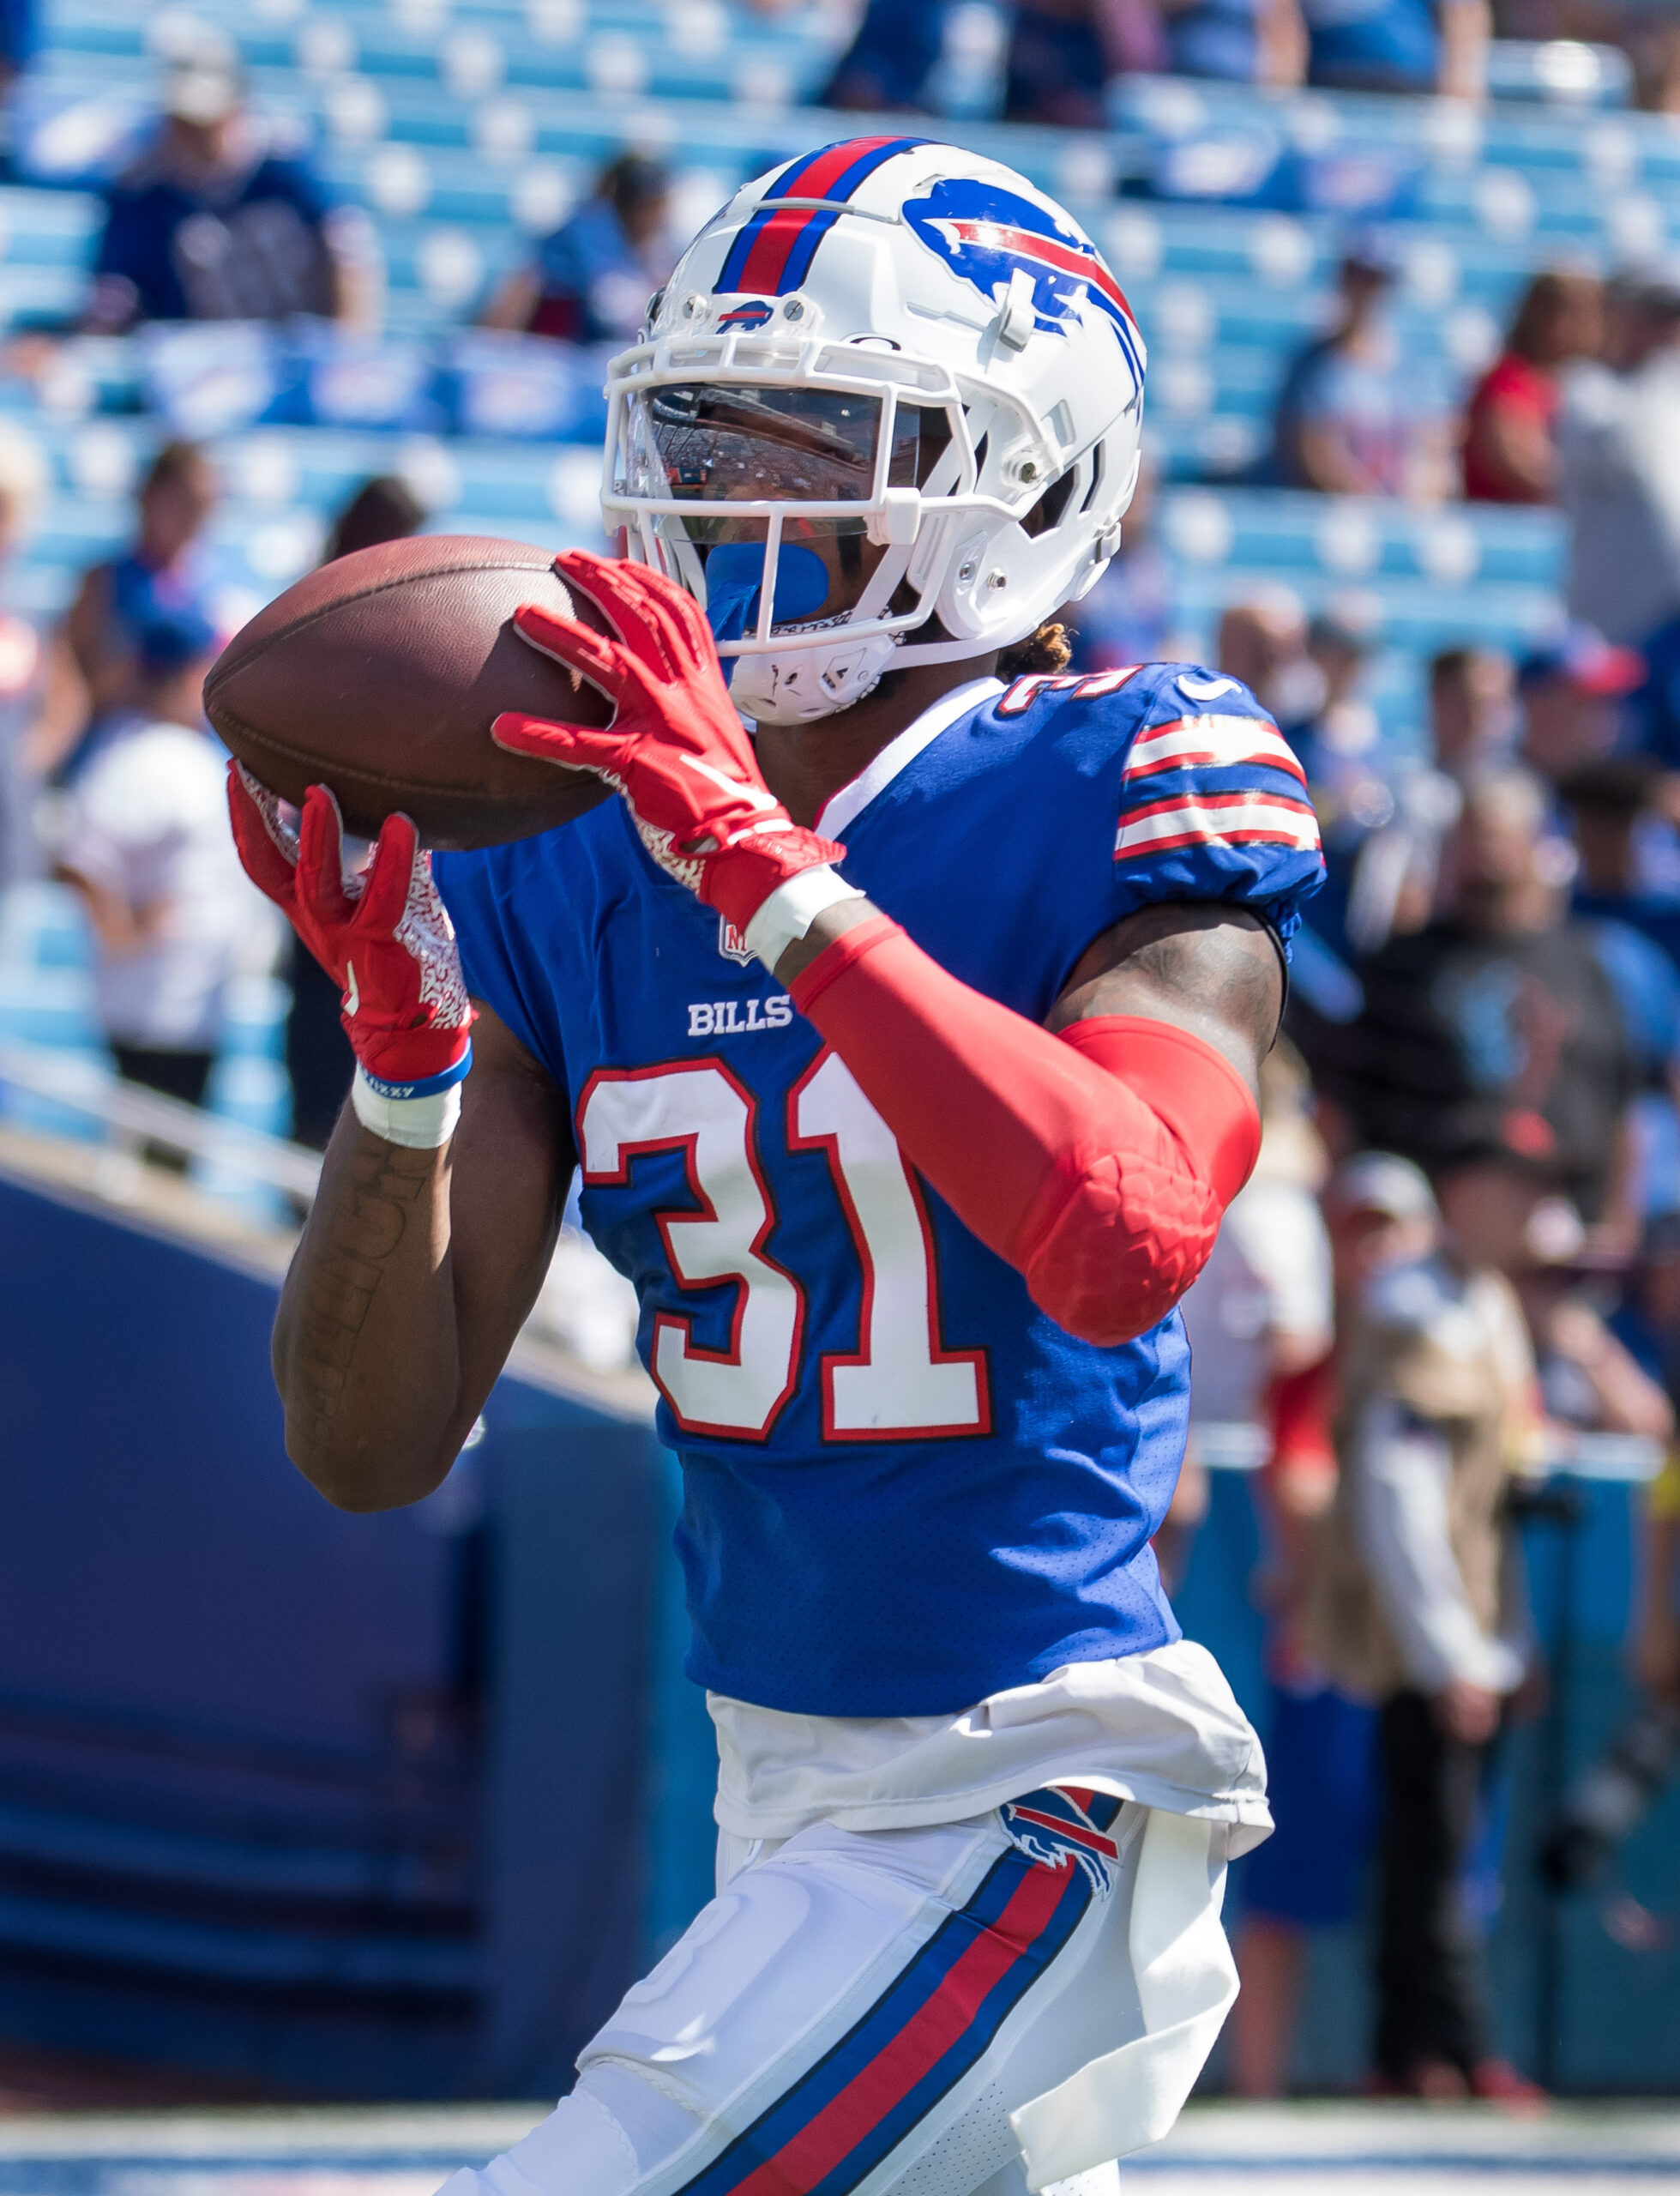 Bills announce numbers trade acquisitions Nyheim Hines, Dean Marlowe